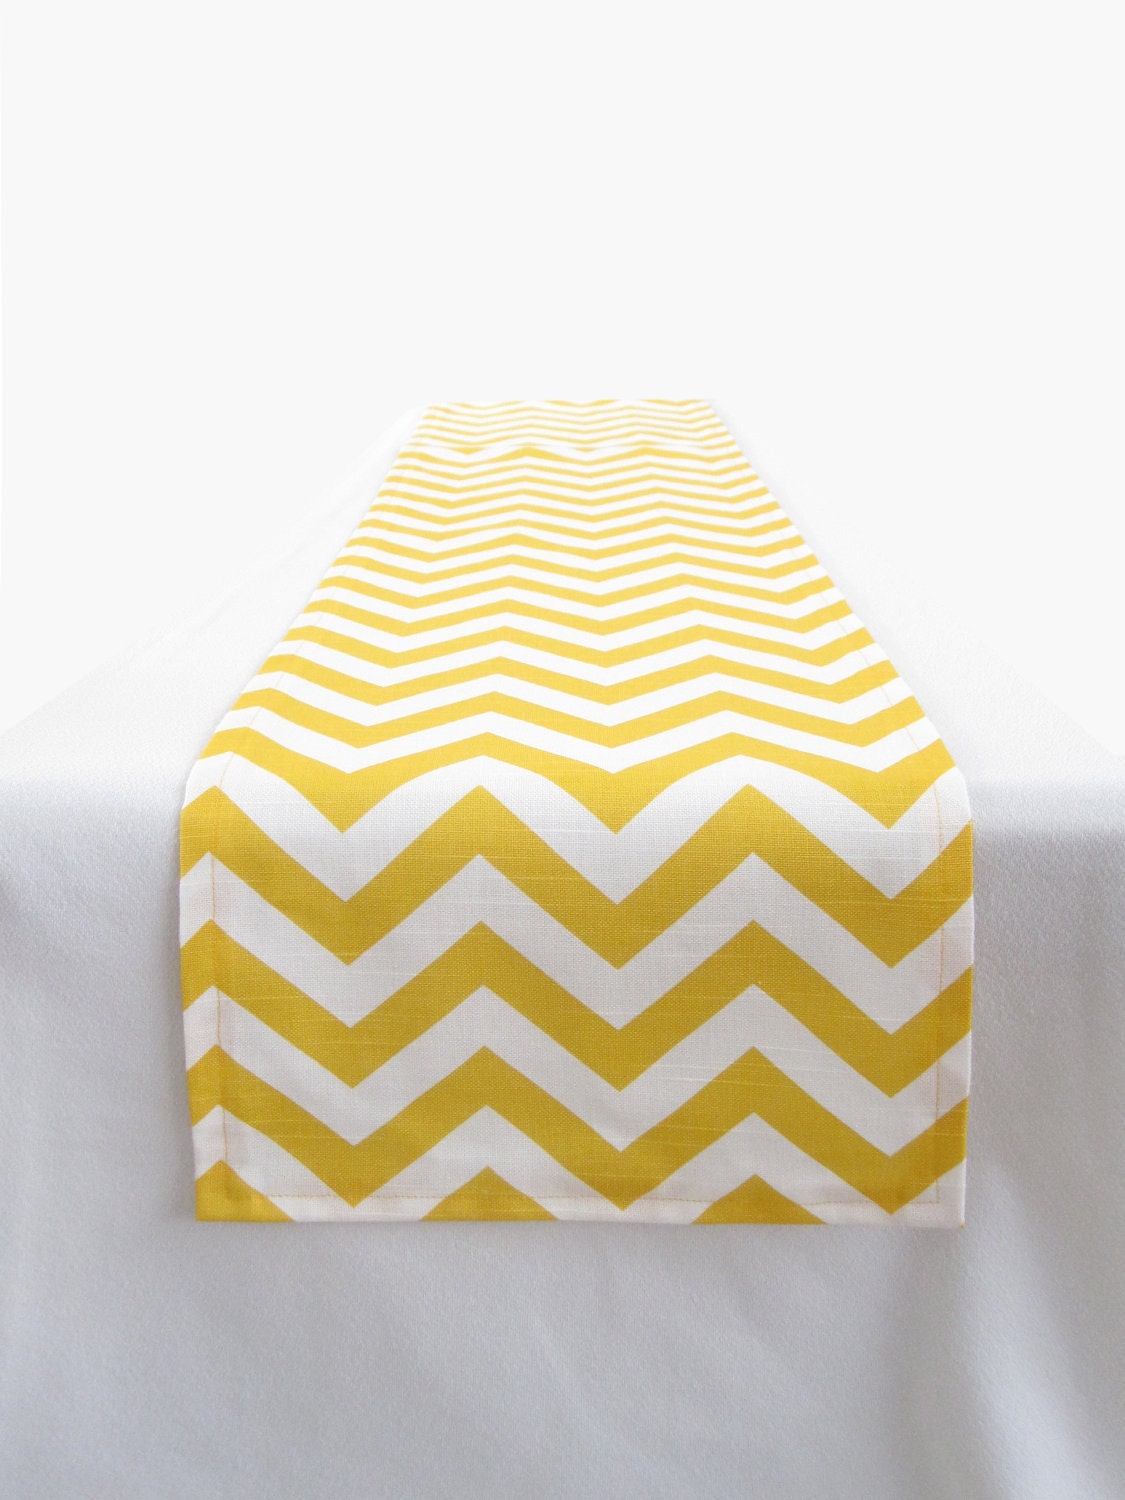 Yellow and White Chevron Table Runner - 11 x 129 in. - Ultrapom